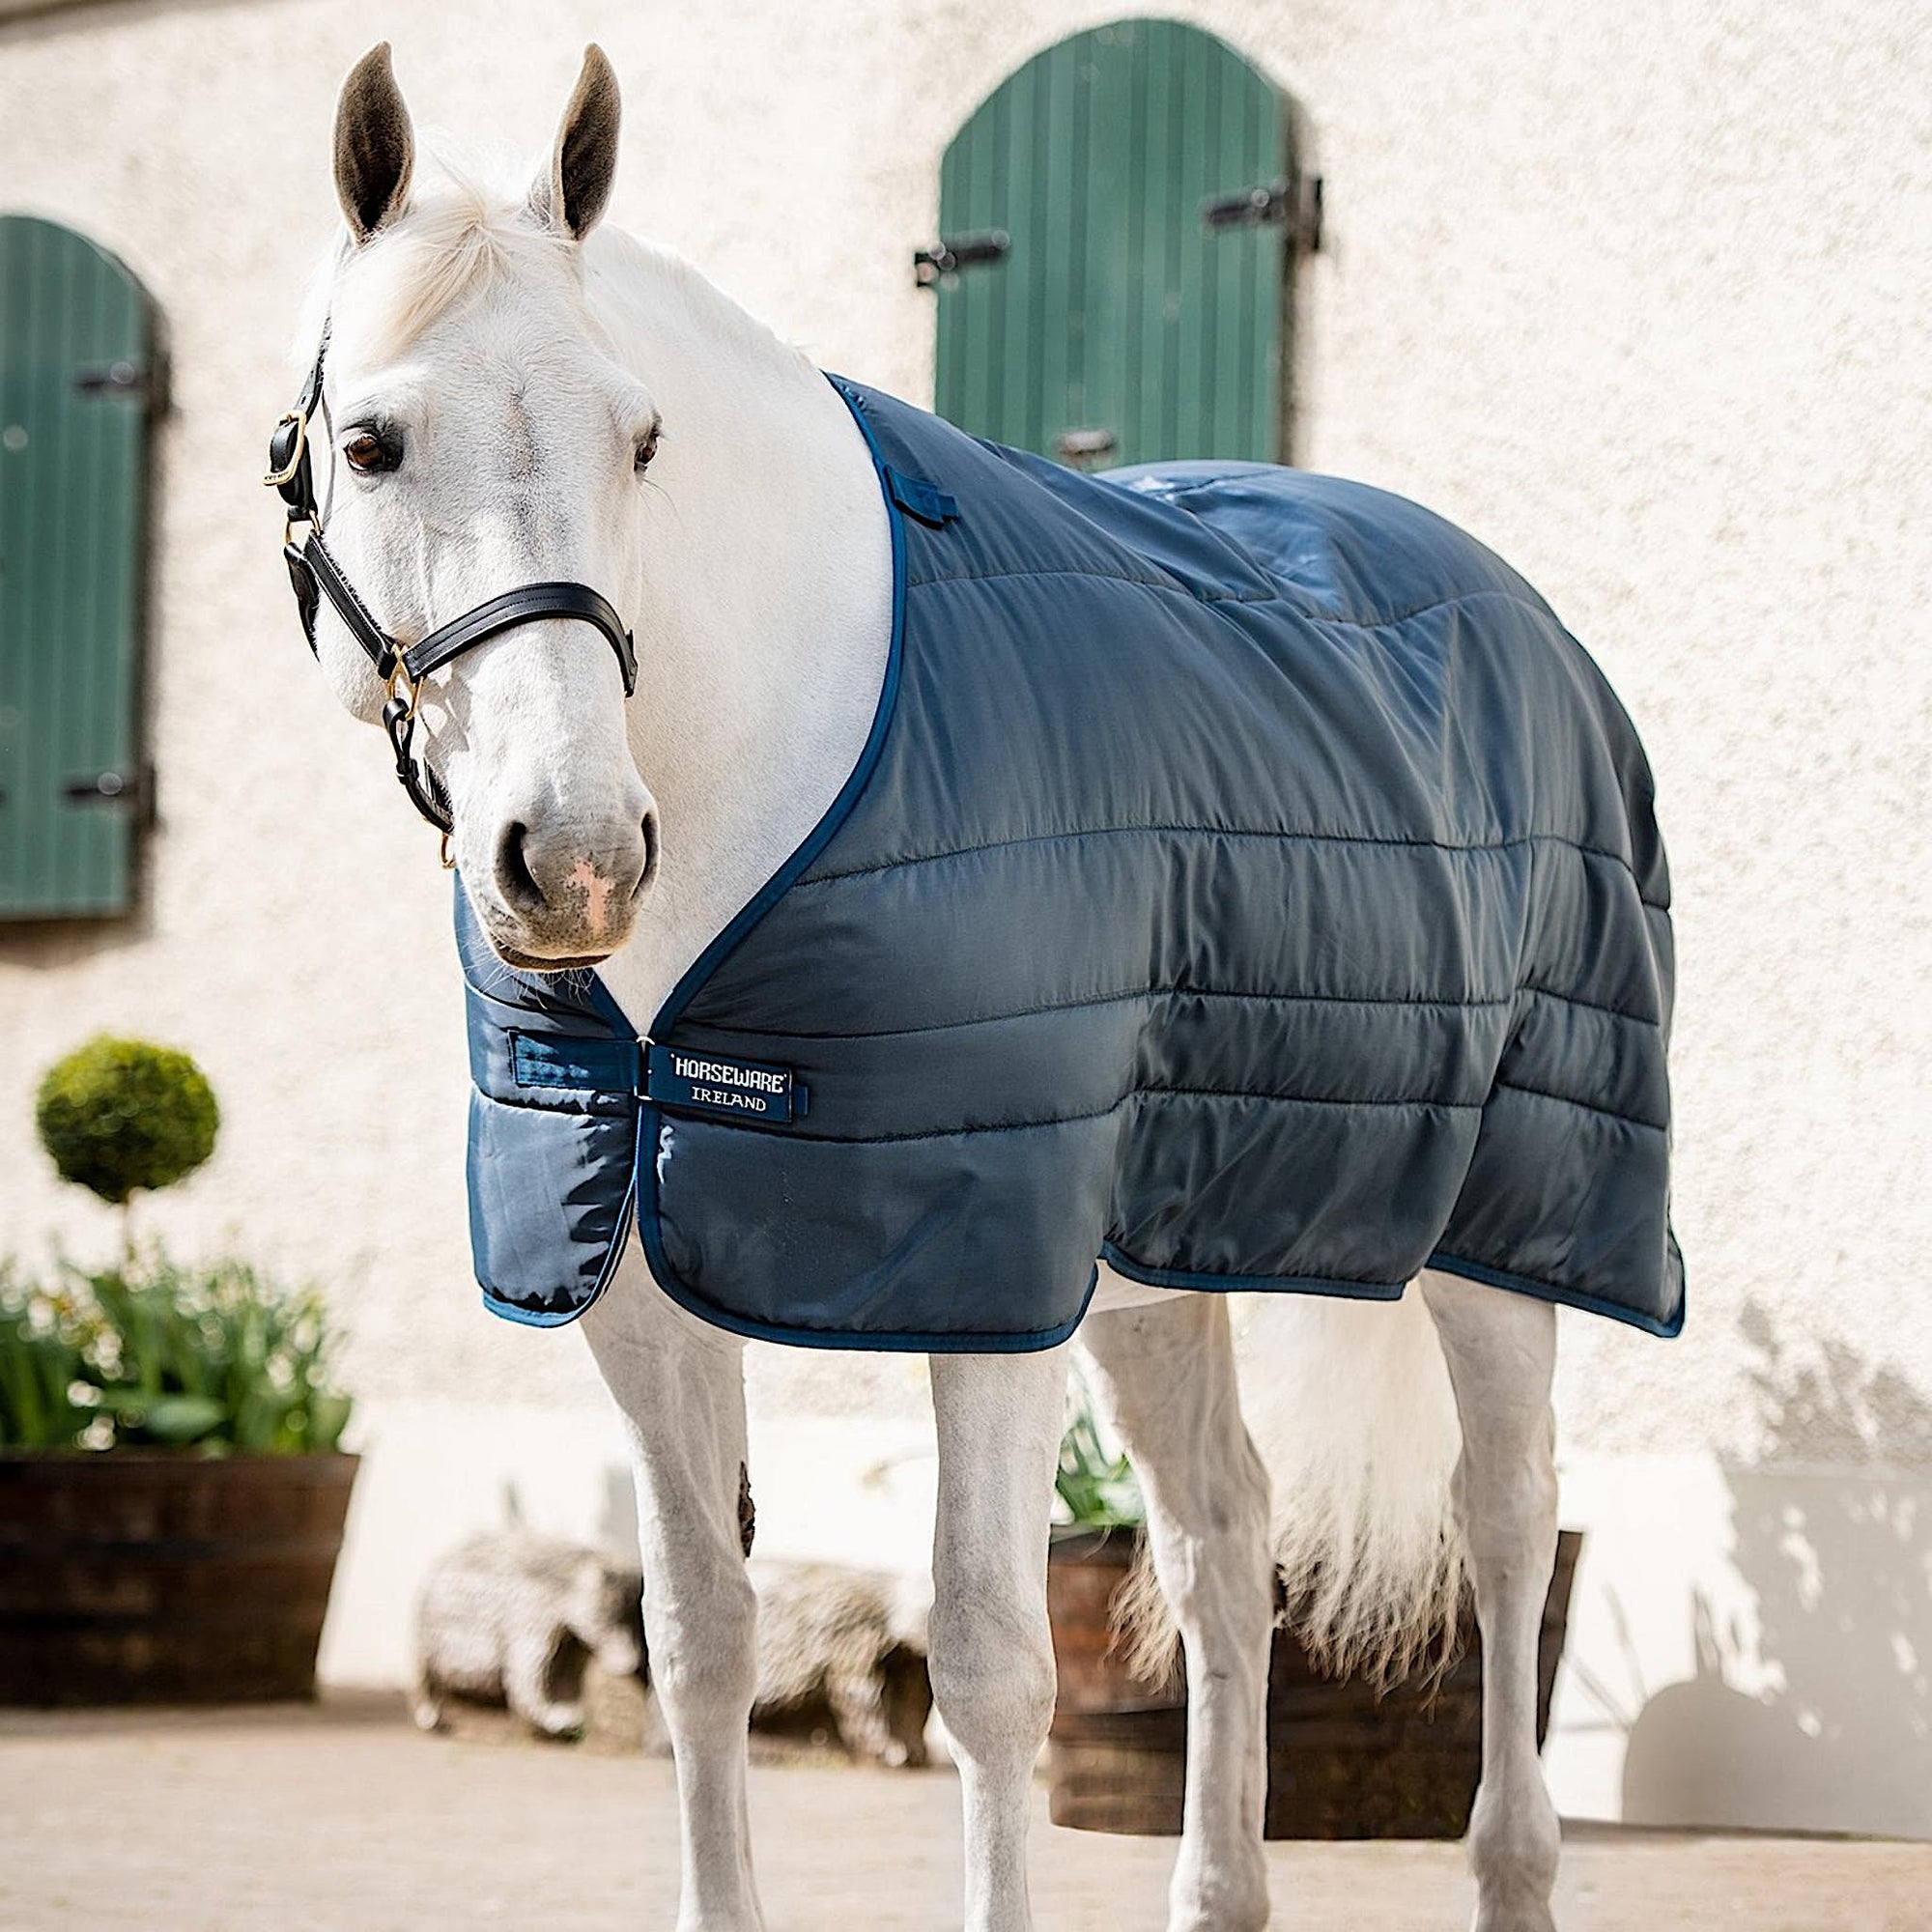 Grey horse wearing a navy liner rug with navy trim. 